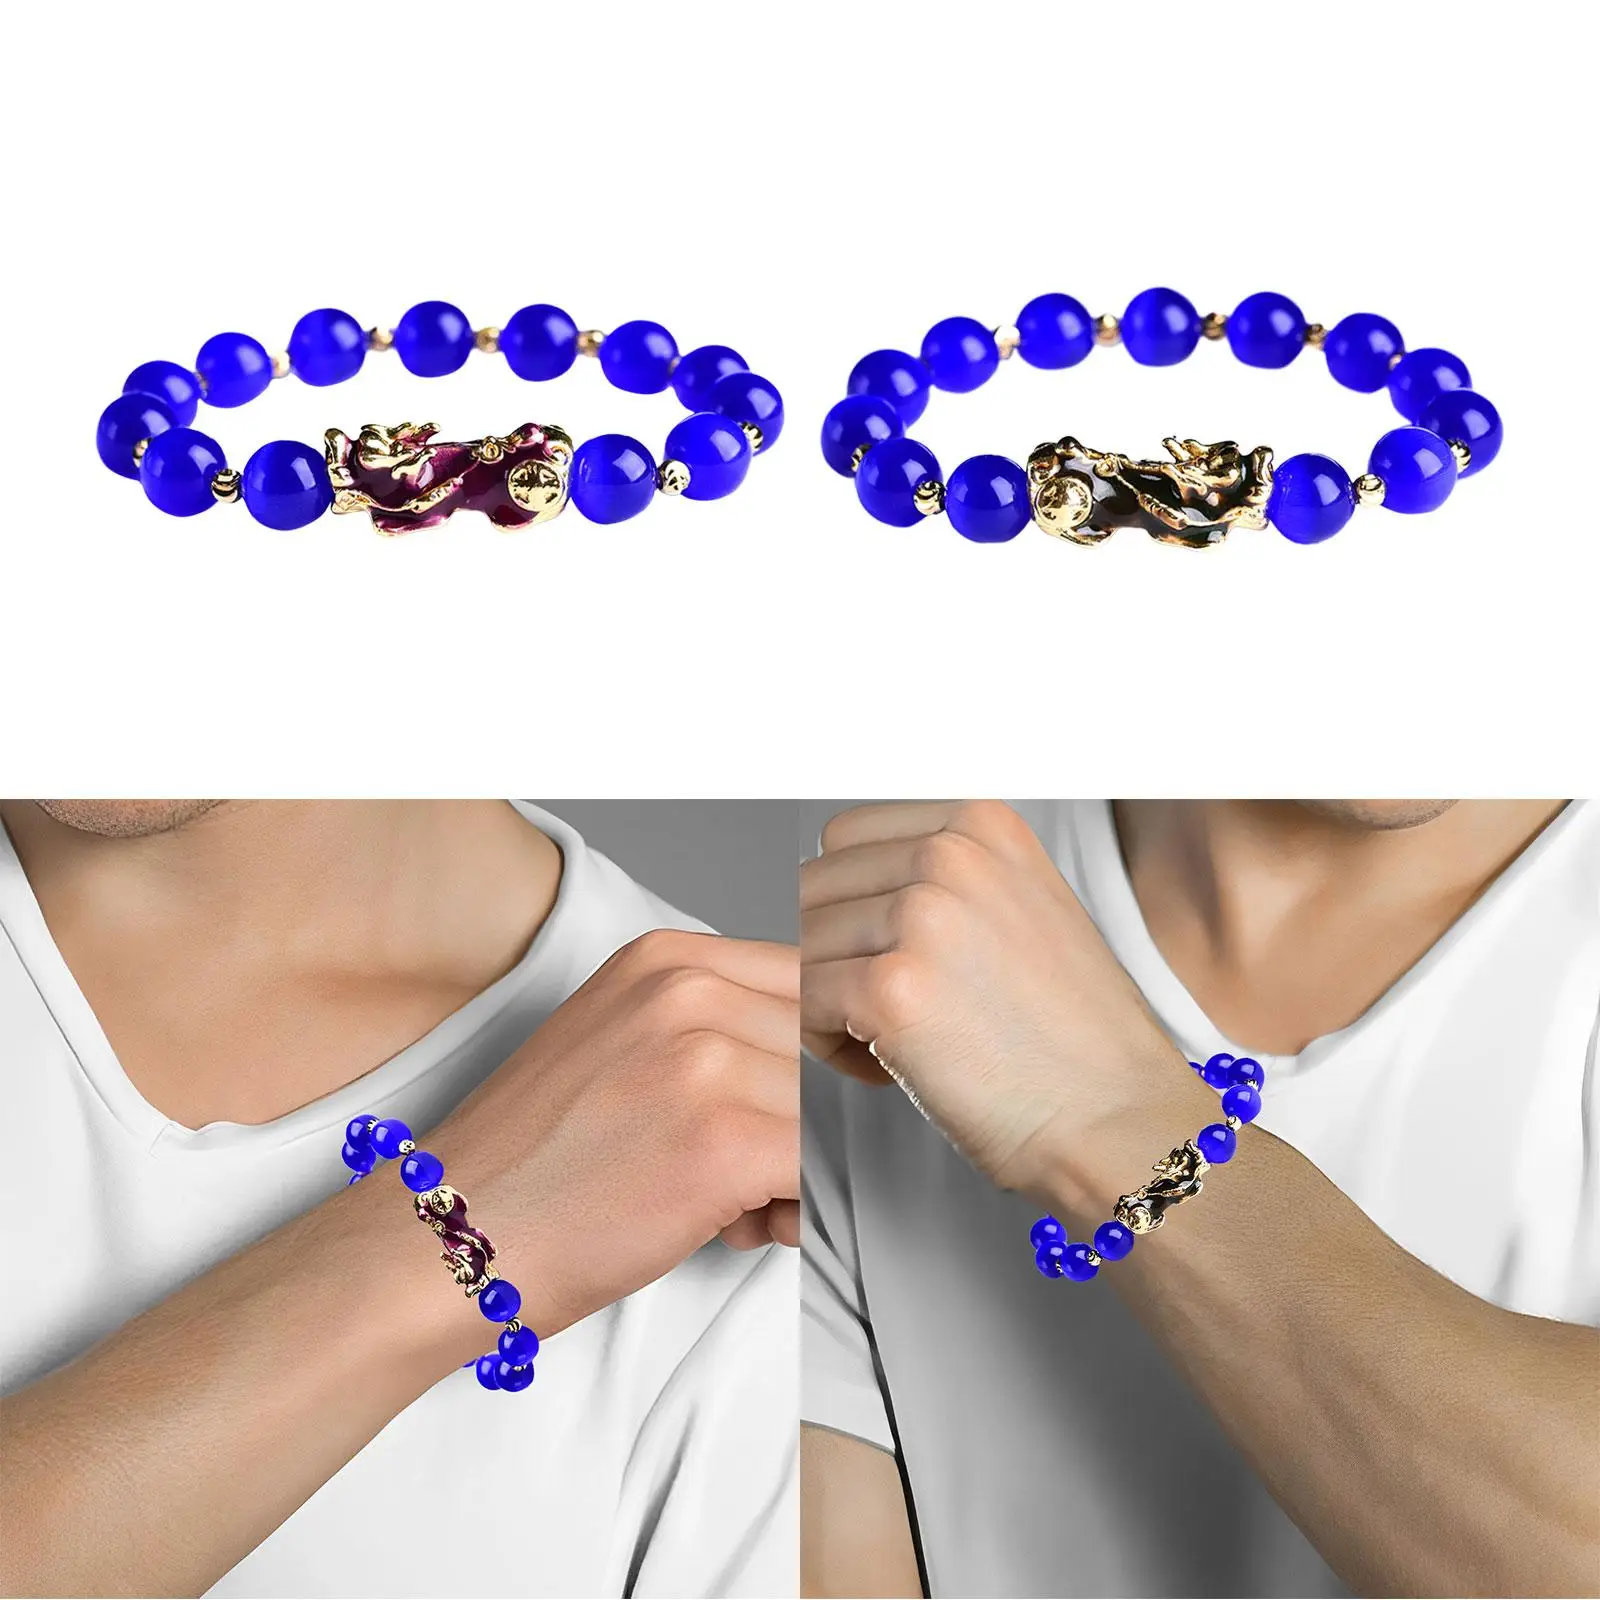 Beaded Bracelet Traditional Valentine`s Day Gift Suitable for Dating or Formal Occasion Pi Yao Pendant Jewelry Gift Bangle